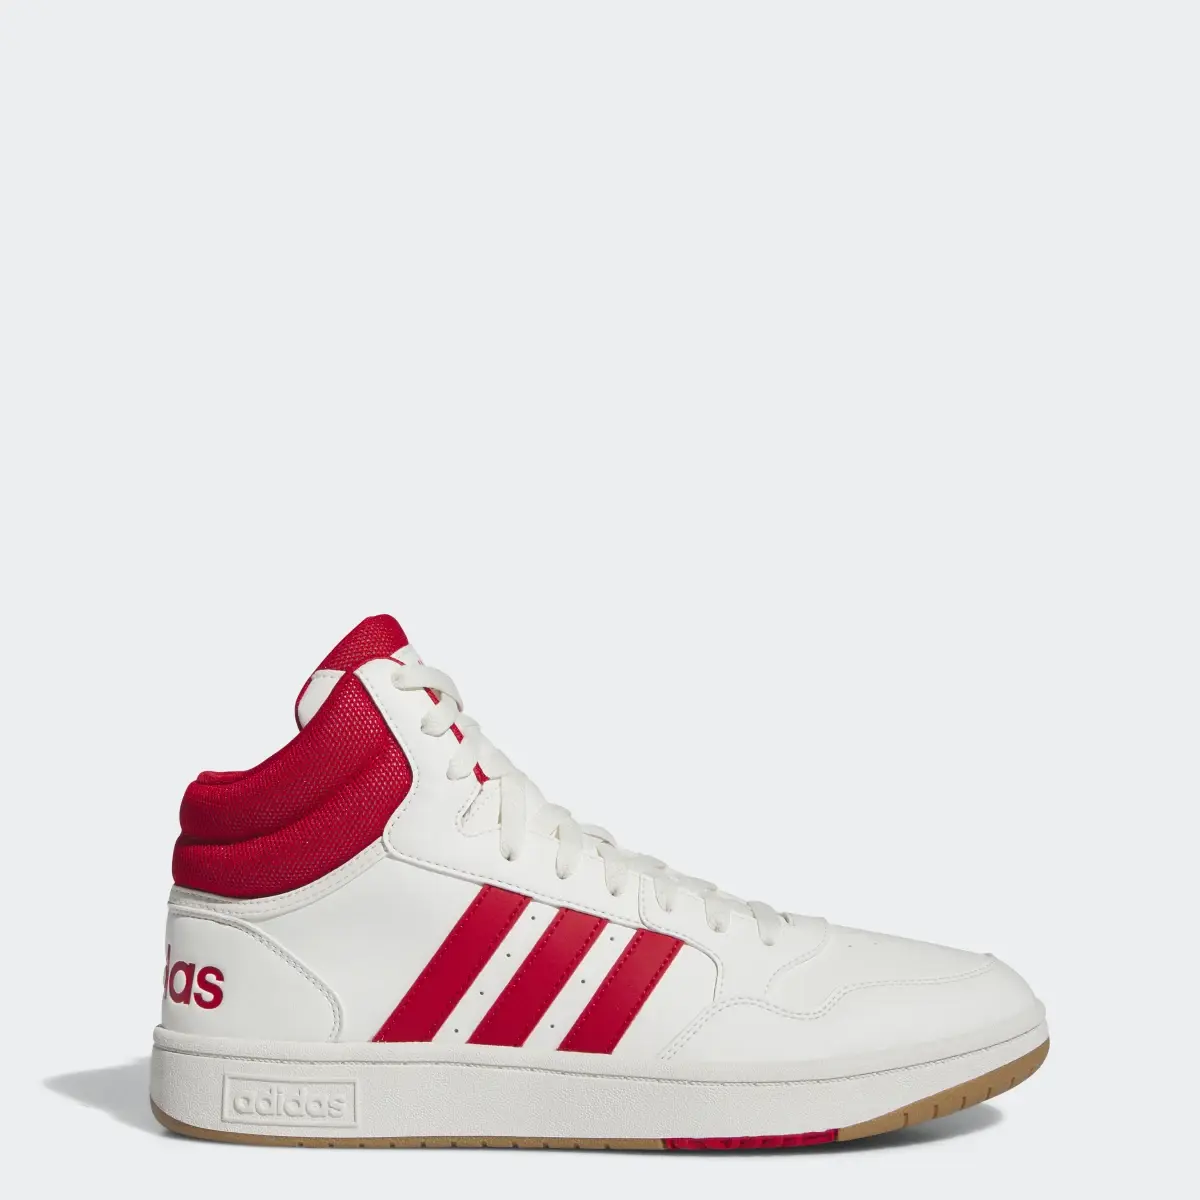 Adidas Hoops 3.0 Mid Lifestyle Basketball Classic Vintage Shoes. 1